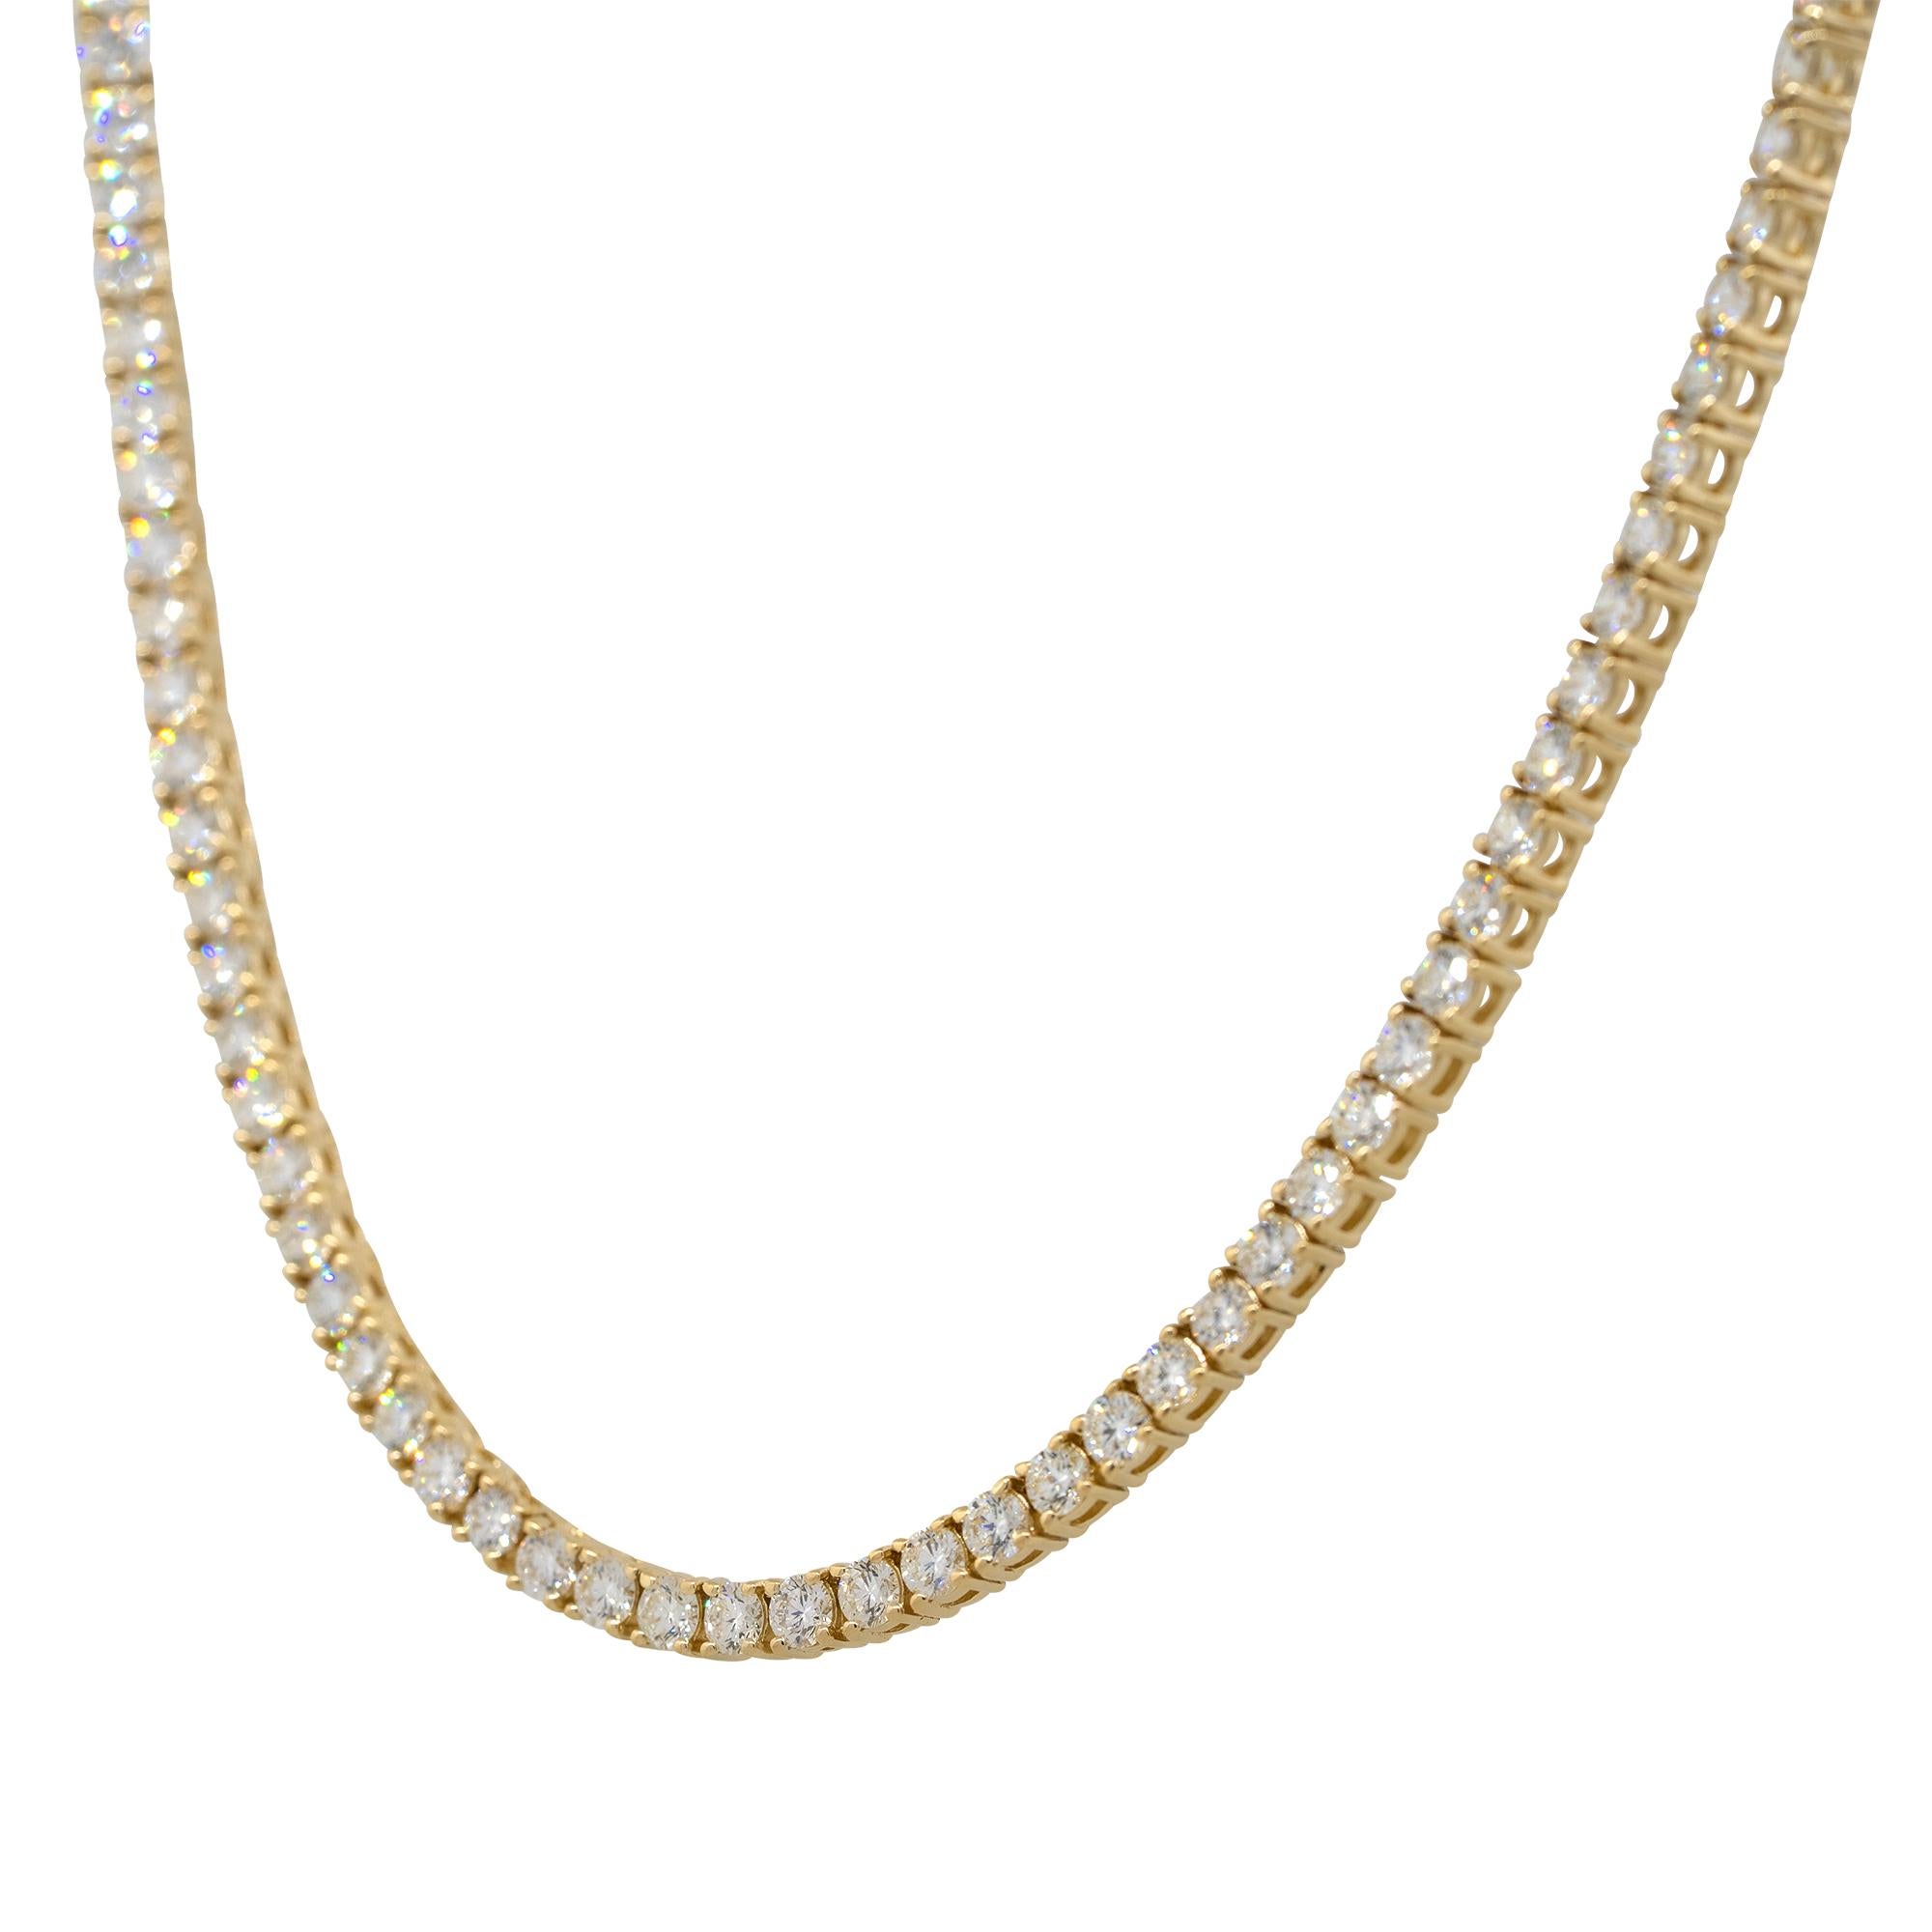 6.76 Carat Round Diamond Four Prong Tennis Necklace 14 Karat in Stock In New Condition For Sale In Boca Raton, FL